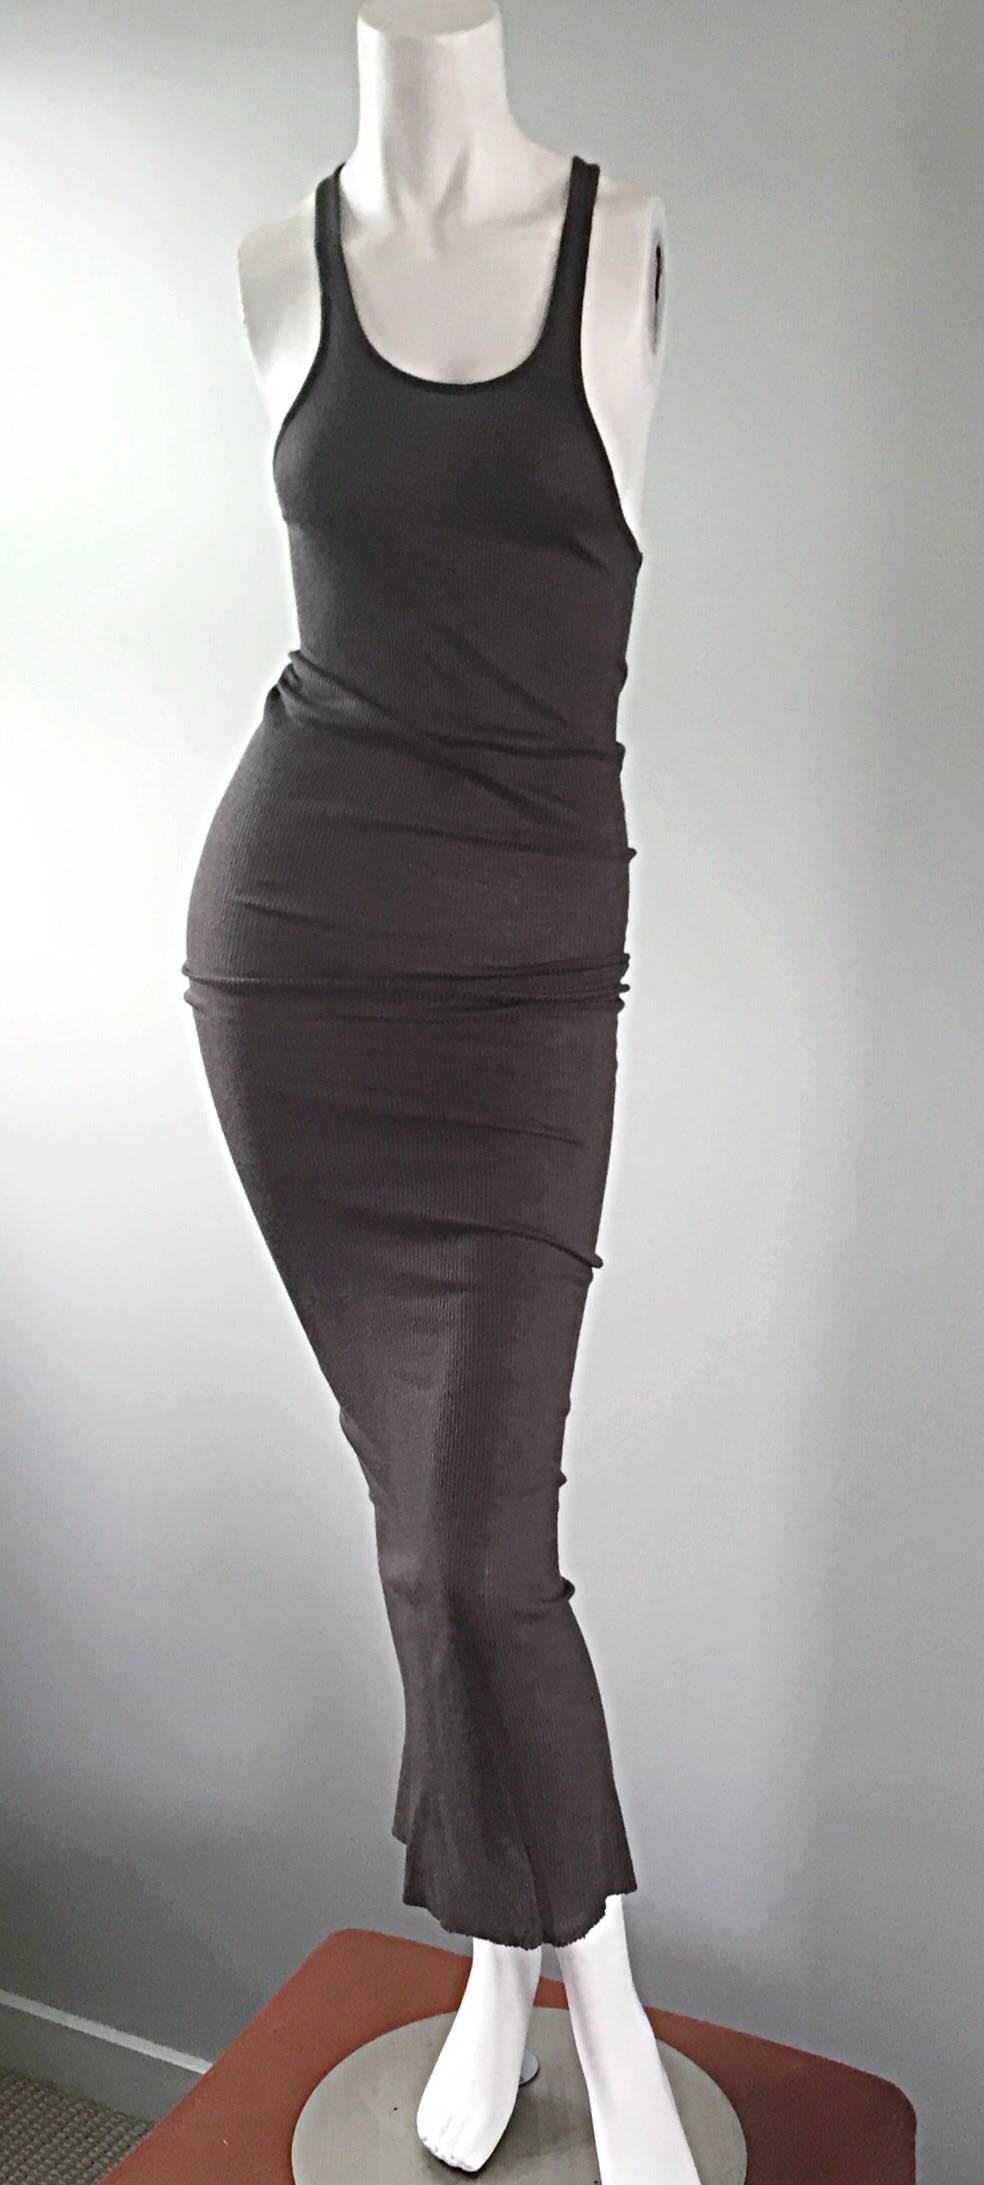 Iconic and Rare Rick Owens signature long tank dress, in hard to come by RO color---DARKDUS!!! This particular length (62 inches) is extremely rare to come by! I have seen the midi length version a few times, but never in this length! Chic BodCon